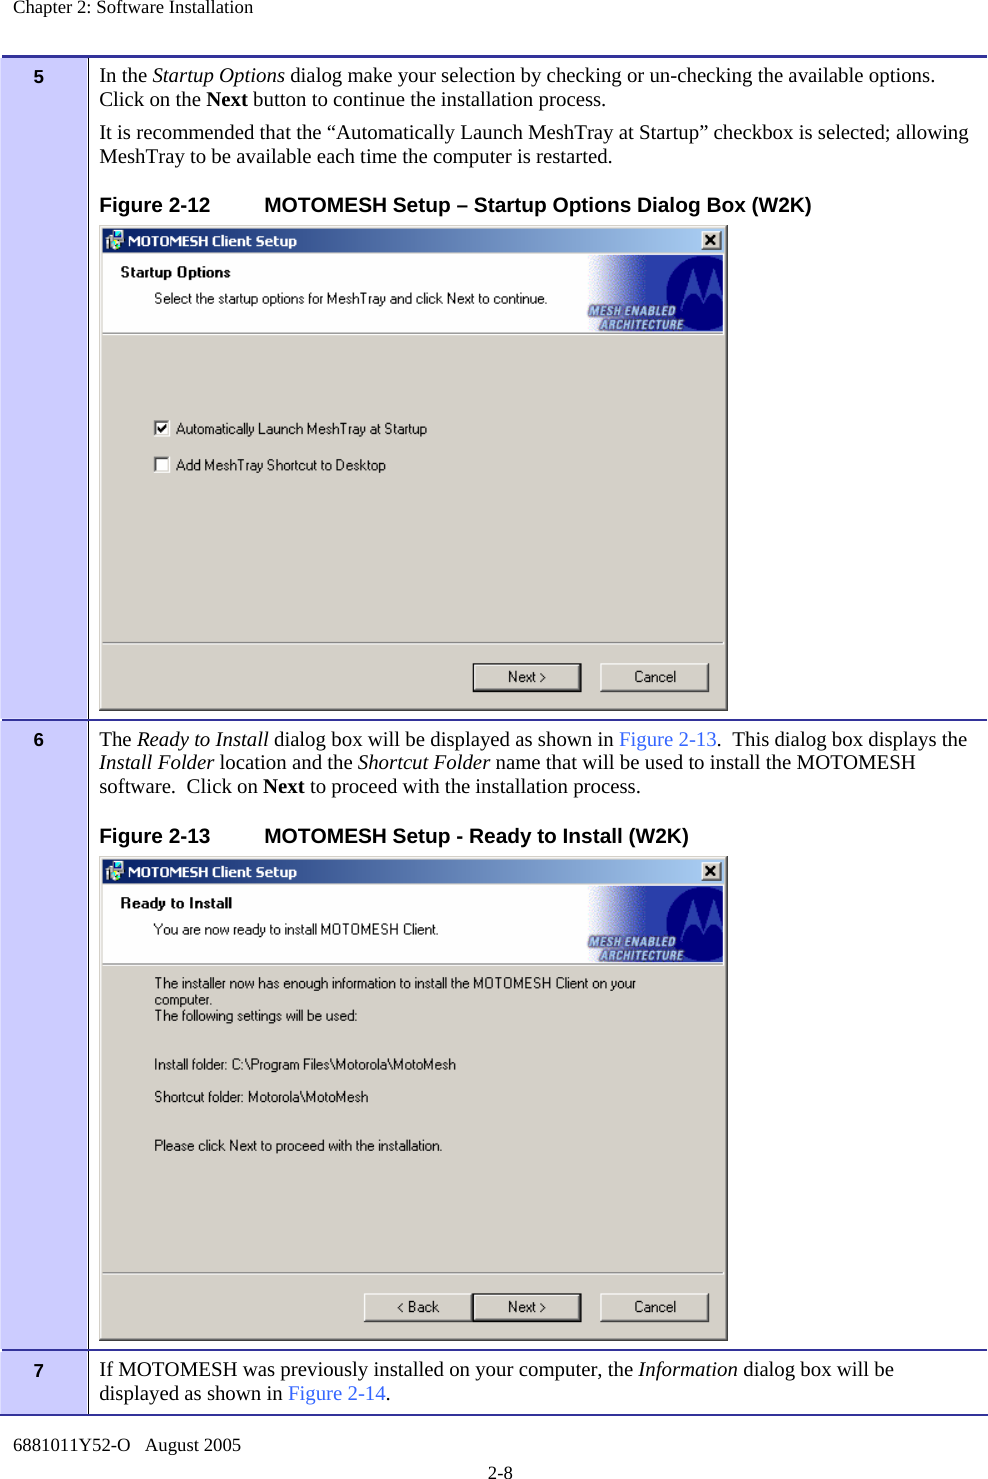 Chapter 2: Software Installation 6881011Y52-O   August 2005 2-8 5   In the Startup Options dialog make your selection by checking or un-checking the available options.  Click on the Next button to continue the installation process. It is recommended that the “Automatically Launch MeshTray at Startup” checkbox is selected; allowing MeshTray to be available each time the computer is restarted. Figure 2-12  MOTOMESH Setup – Startup Options Dialog Box (W2K)  6   The Ready to Install dialog box will be displayed as shown in Figure 2-13.  This dialog box displays the Install Folder location and the Shortcut Folder name that will be used to install the MOTOMESH software.  Click on Next to proceed with the installation process. Figure 2-13  MOTOMESH Setup - Ready to Install (W2K)  7   If MOTOMESH was previously installed on your computer, the Information dialog box will be displayed as shown in Figure 2-14.   